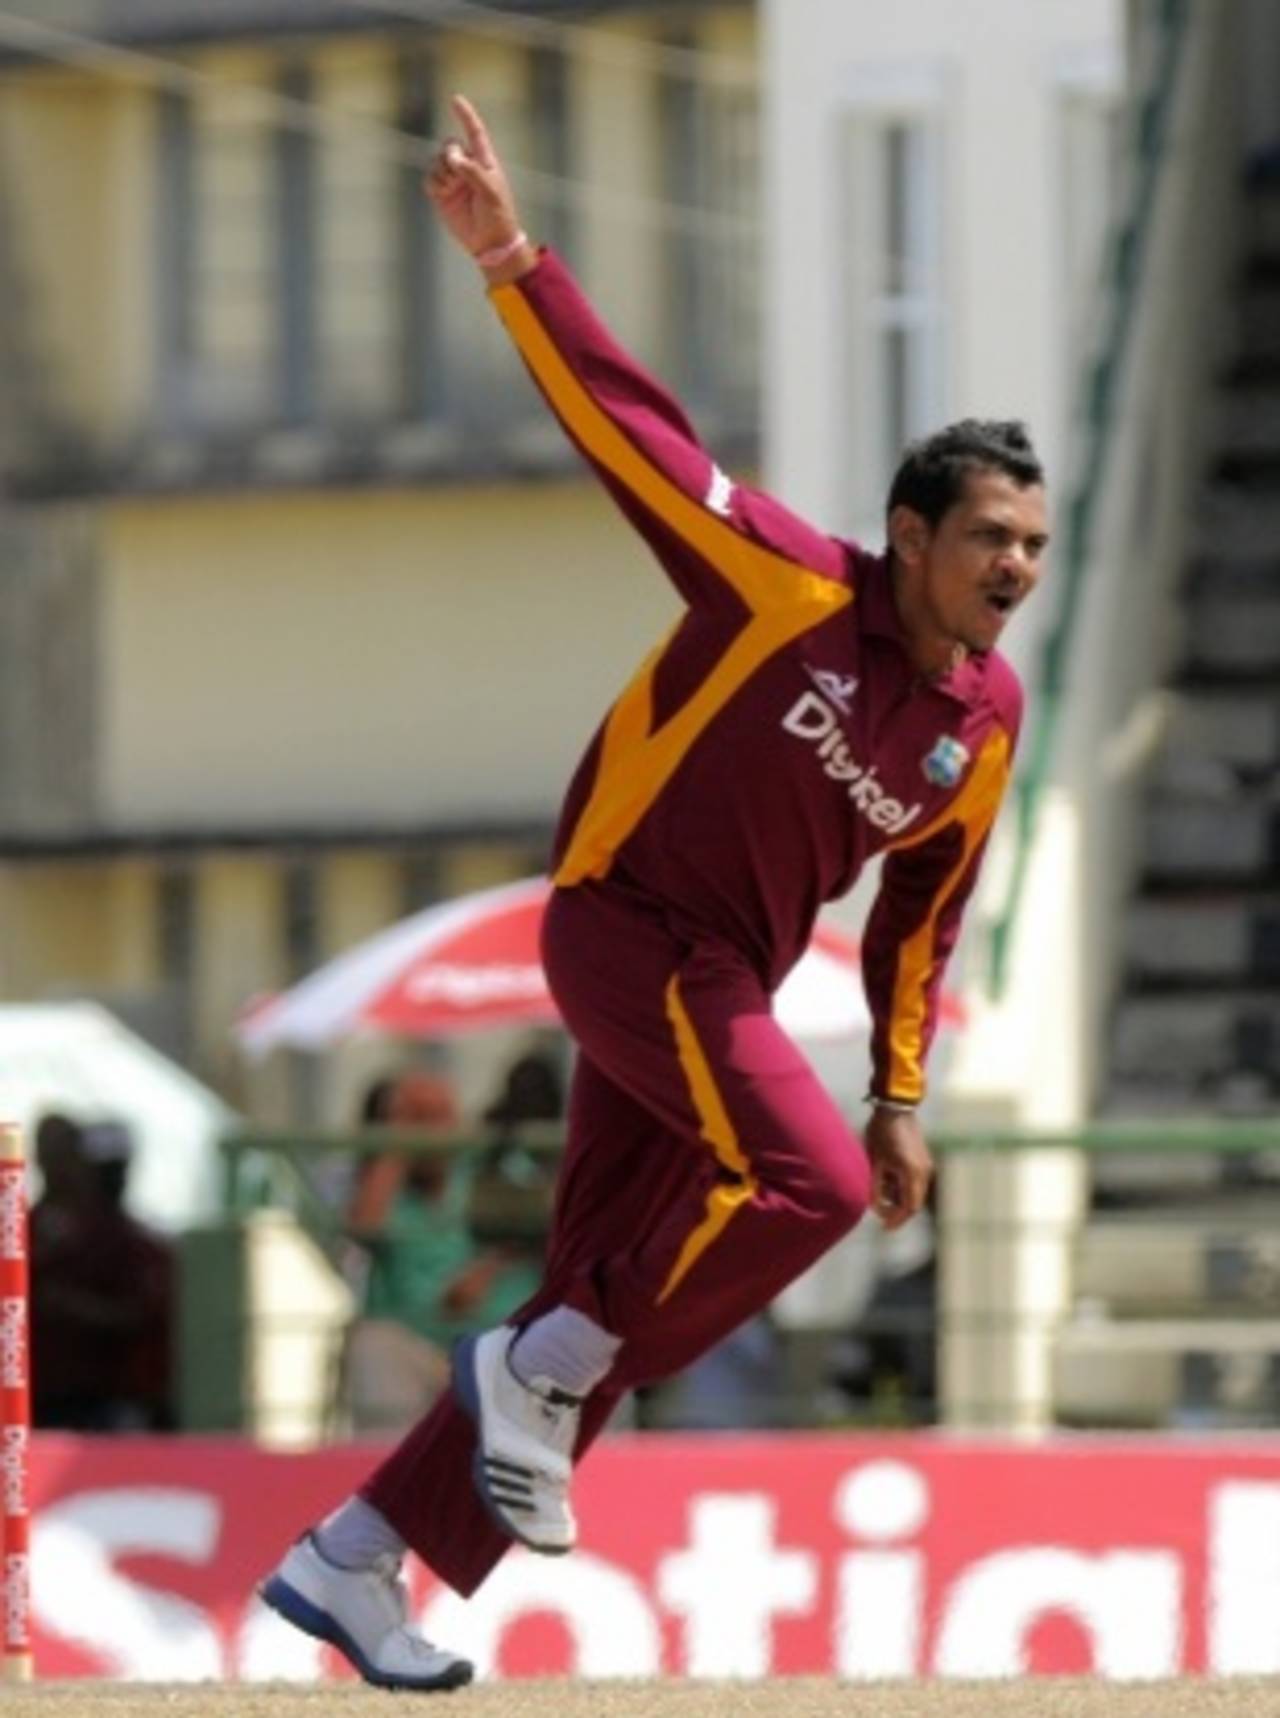 Australia coach Mickey Arthur believes attacking Sunil Narine would be the best aproach to get the better of him&nbsp;&nbsp;&bull;&nbsp;&nbsp;DigicelCricket.com/Brooks LaTouche Photography